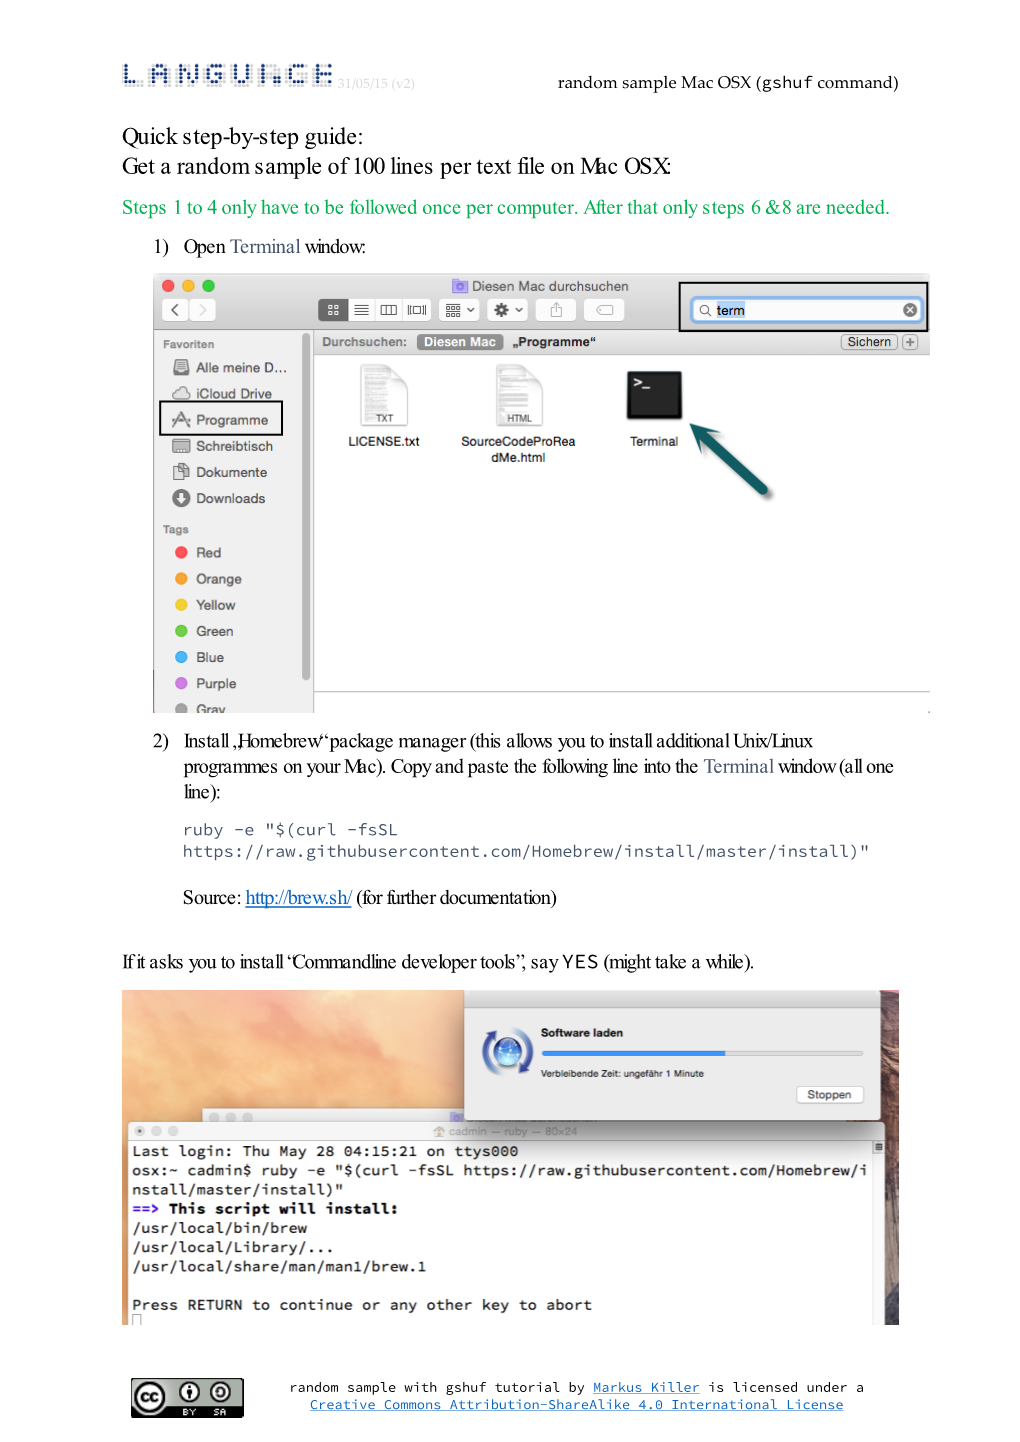 Get a Random Sample of 100 Lines Per Text File on Mac OSX: Steps 1 to 4 Only Have to Be Followed Once Per Computer